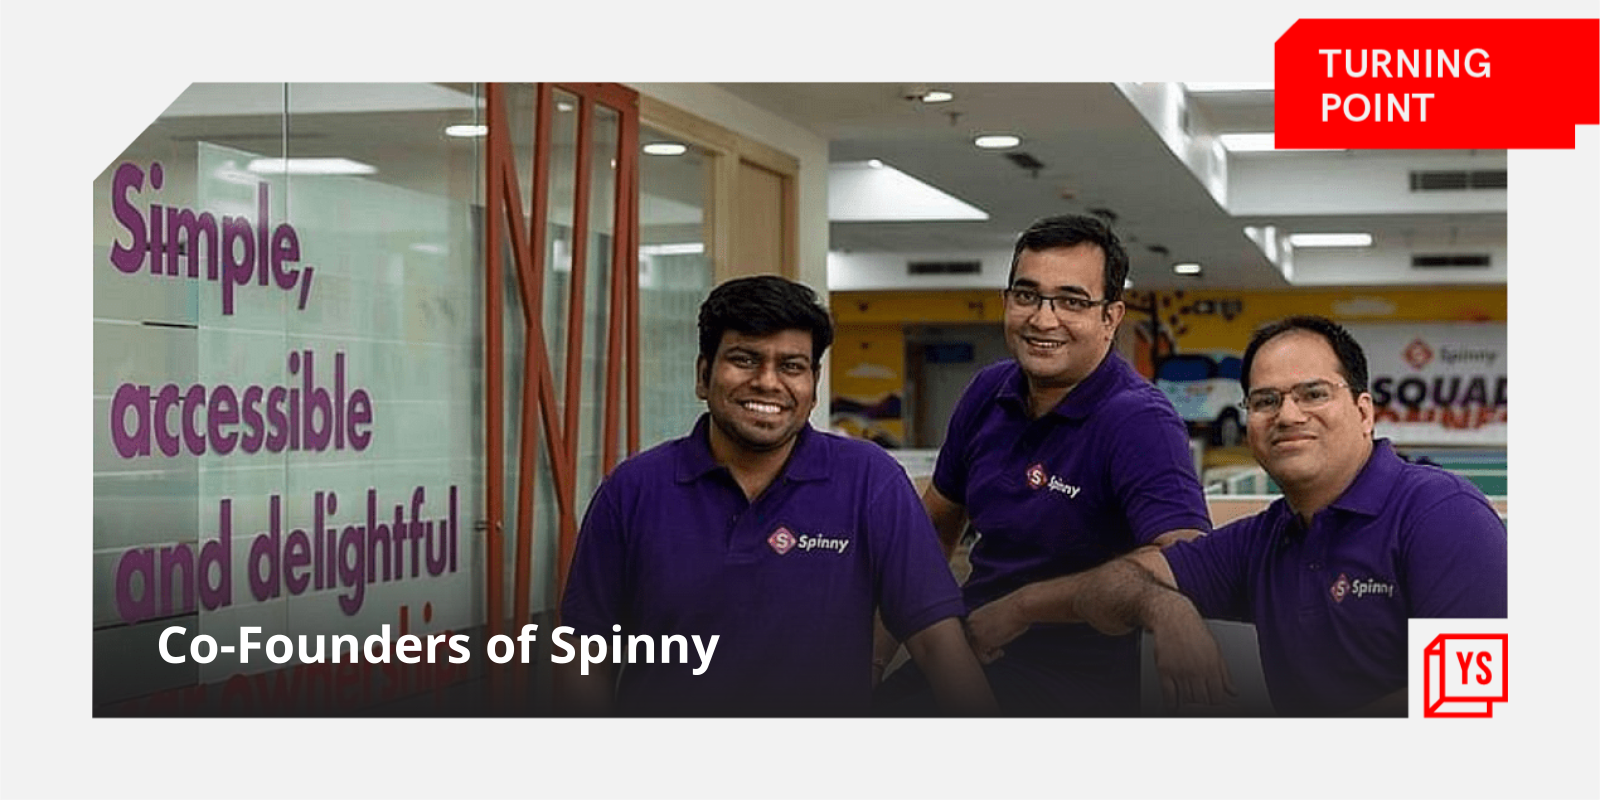 [The Turning Point] How used car retailing startup Spinny was started to weed out the nexus of independent consultants